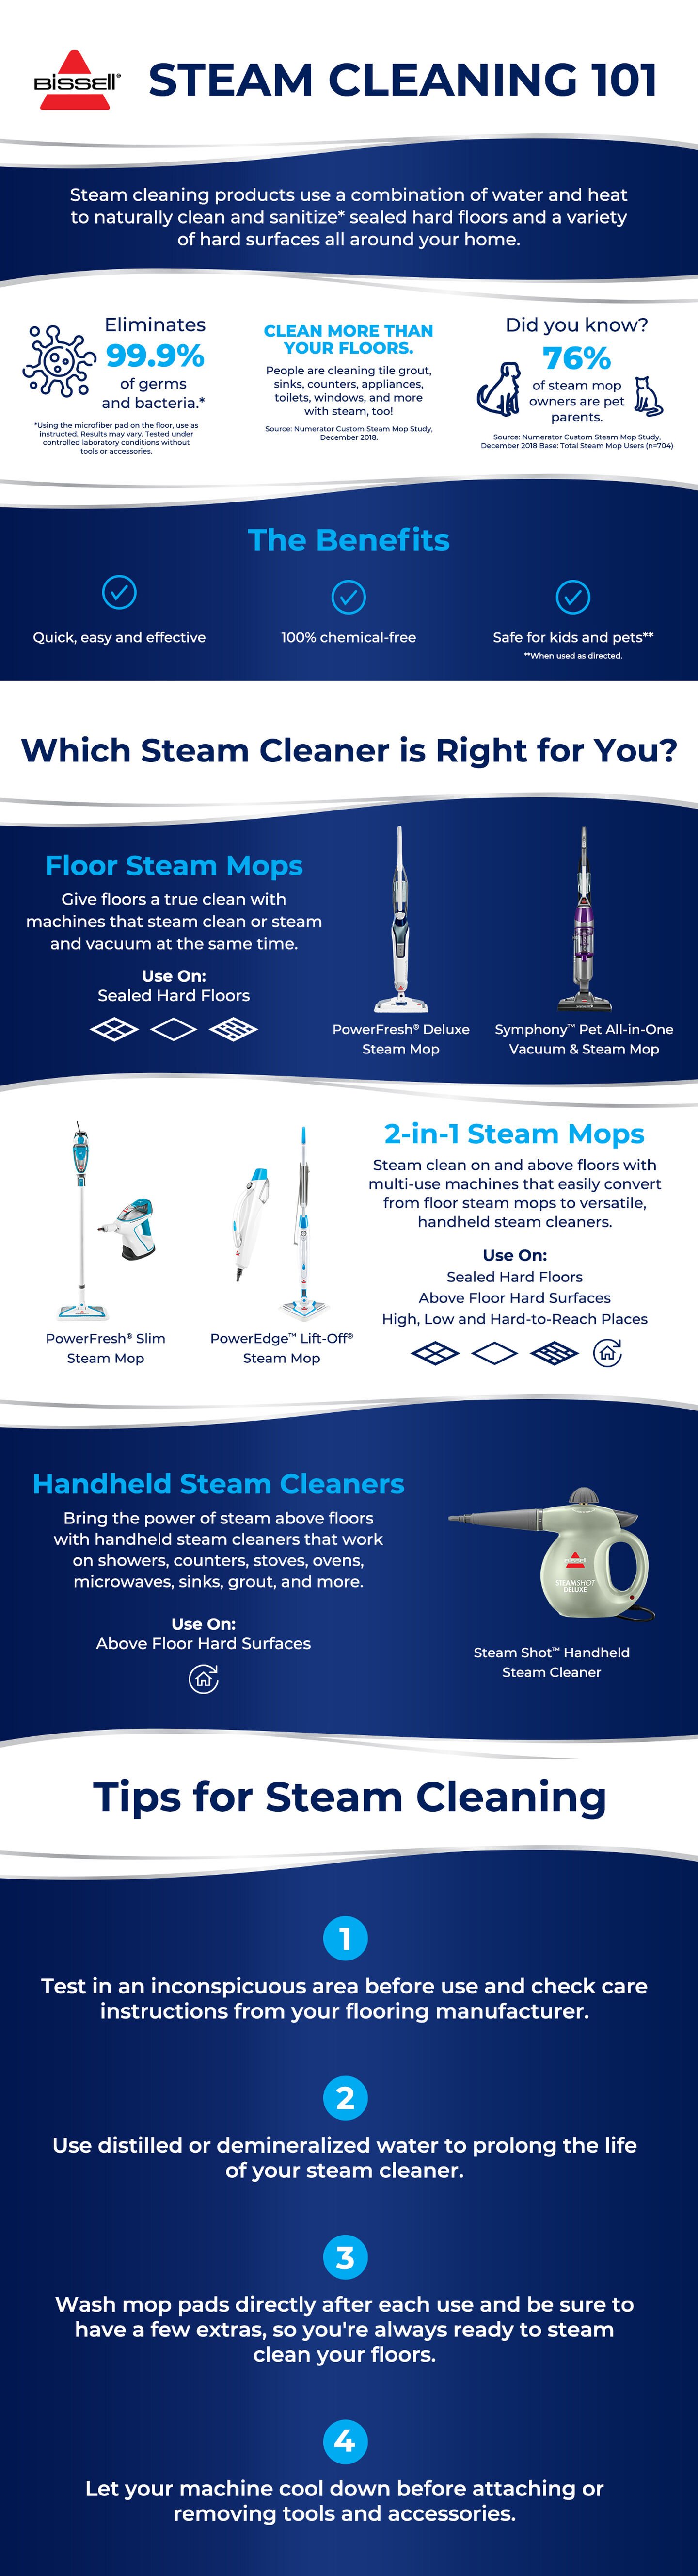 My steam cleaner is my favorite cleaning tool. It allows you to